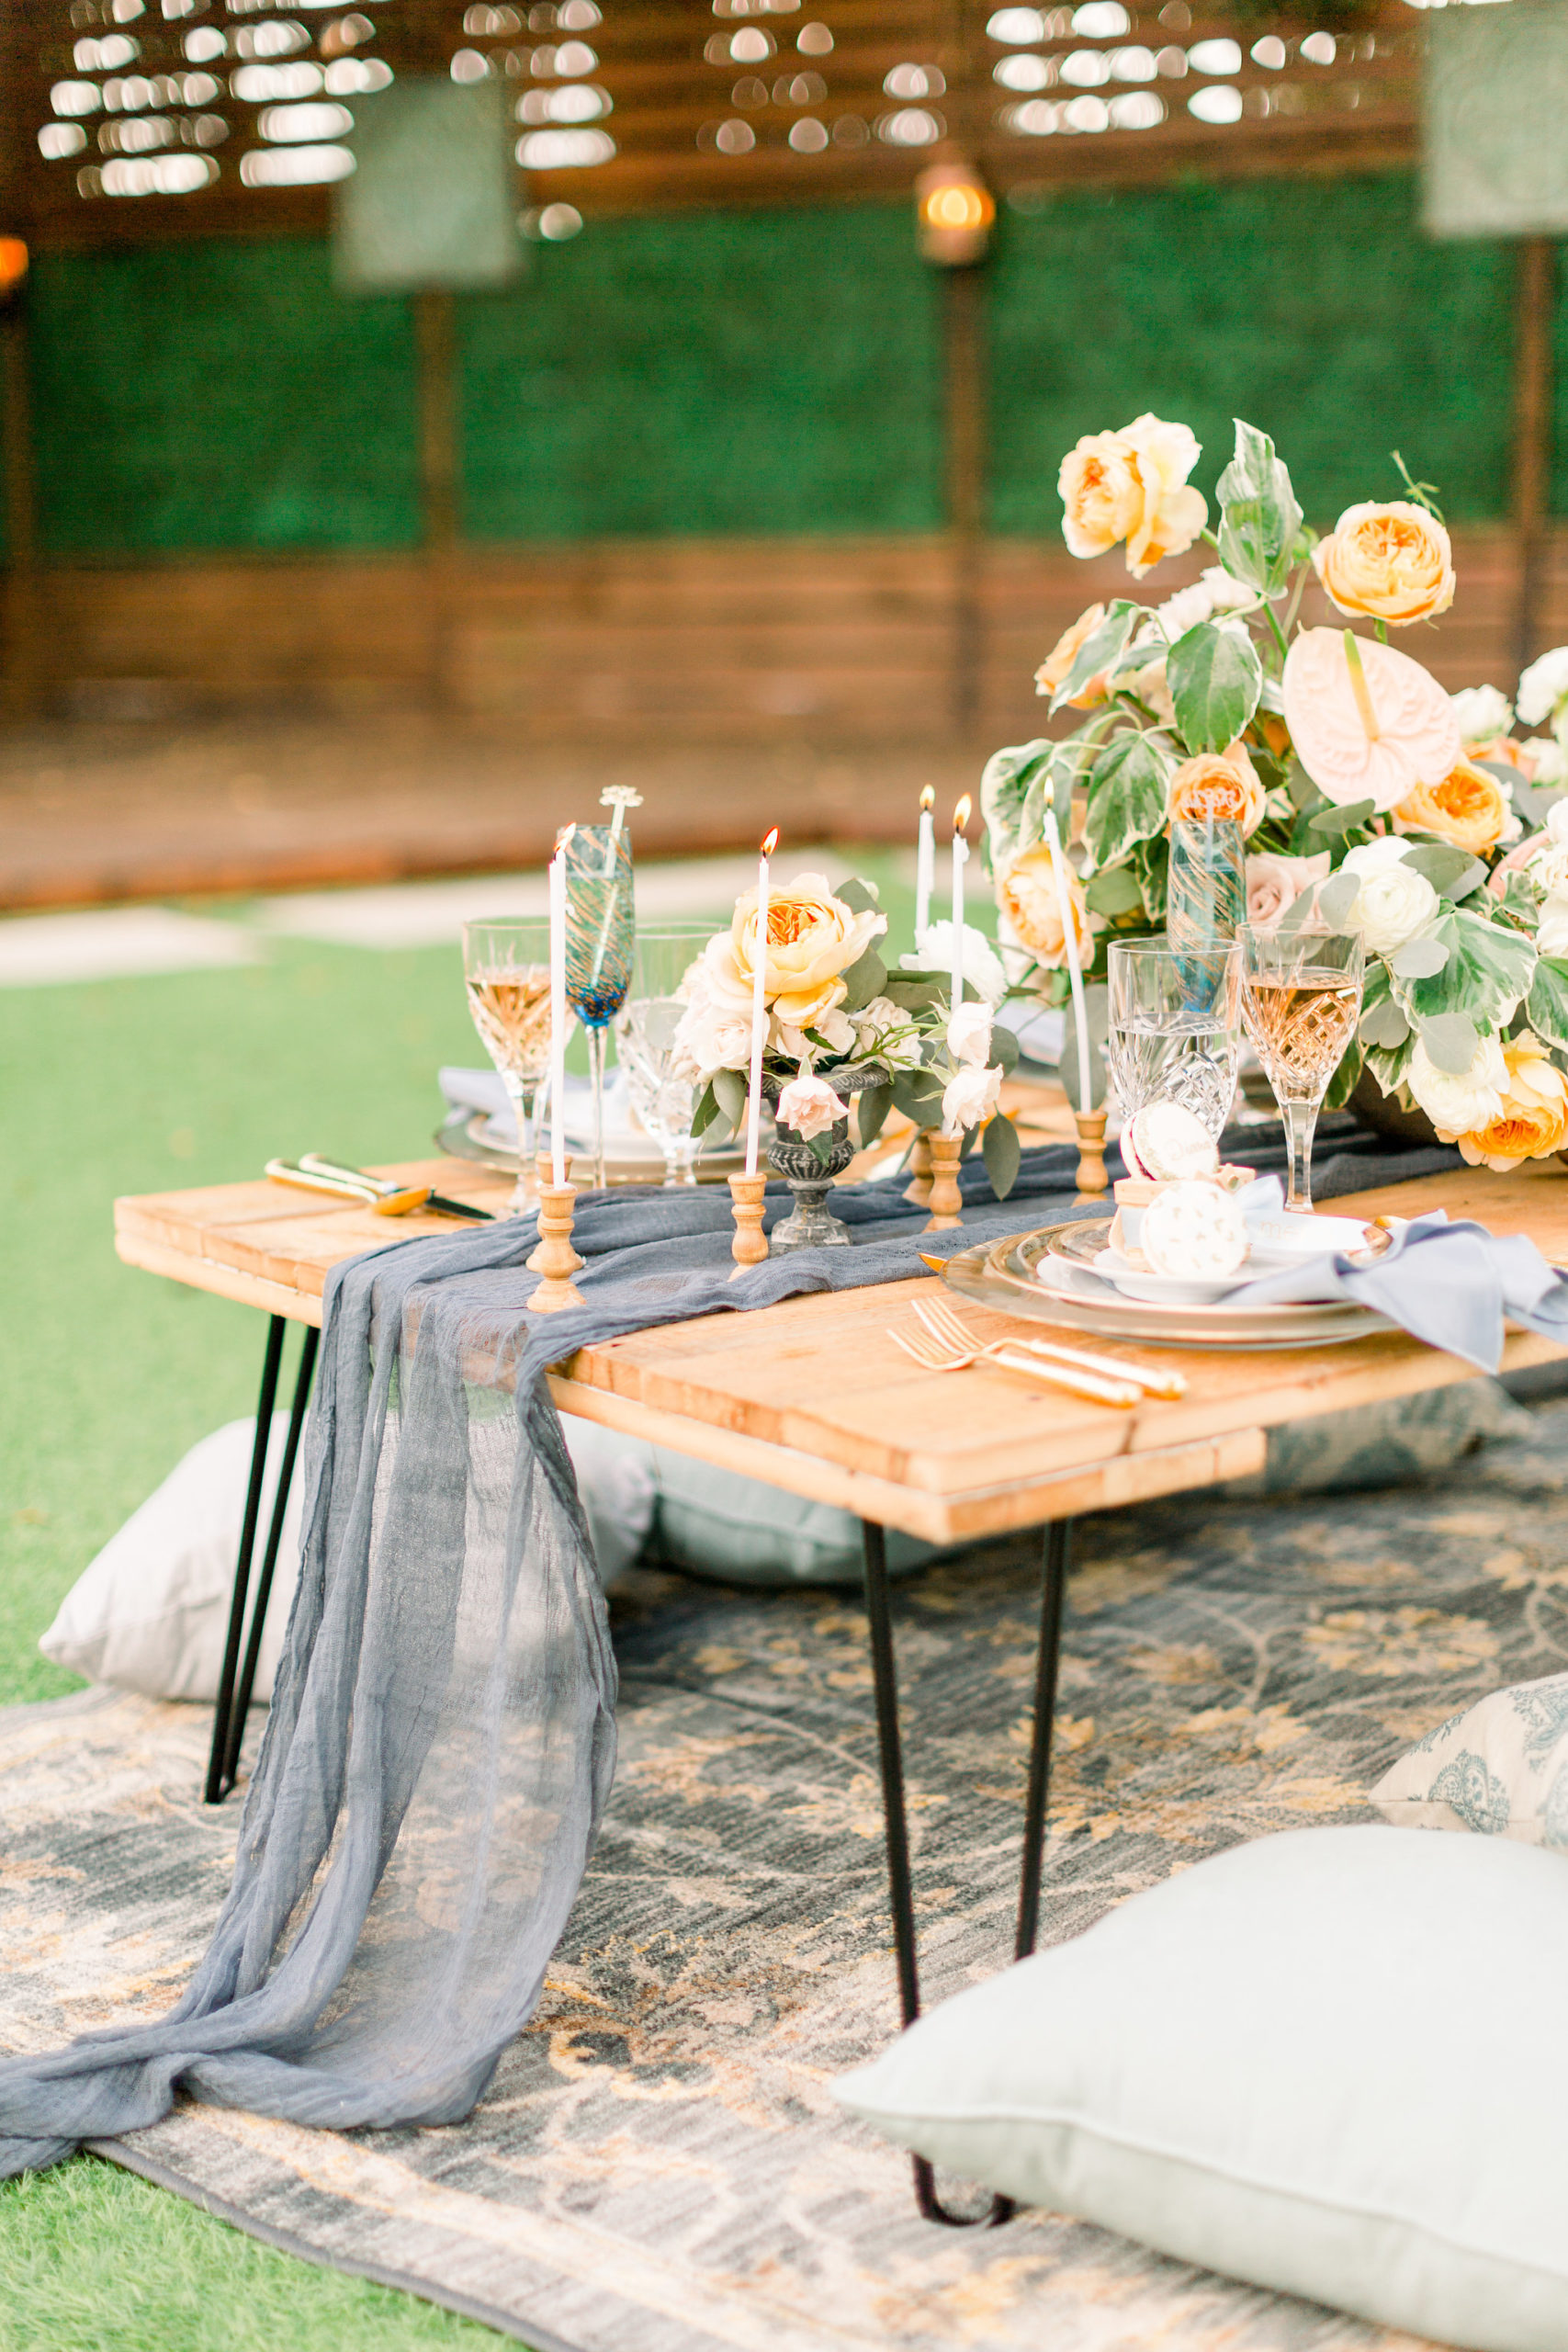 A picnic table set up on a picnic rug with floral centerpieces and wine glasses